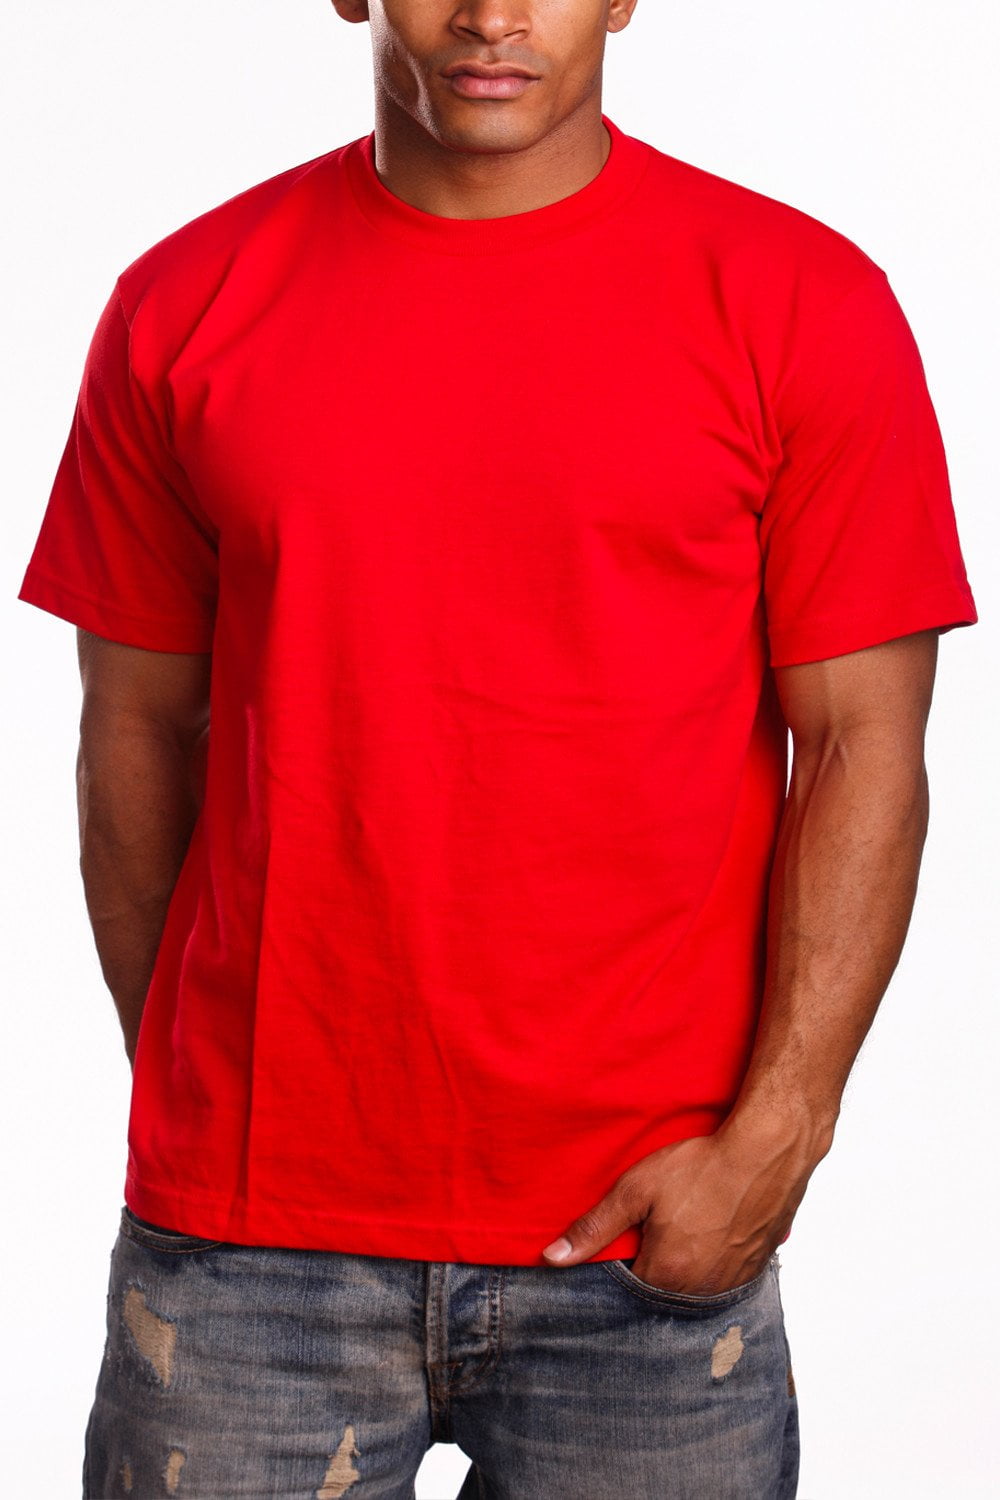 6 NEW PRO5 SUPER HEAVY WEIGHT T-SHIRT RED TEE PLAIN BLANK COTTON S-7XL